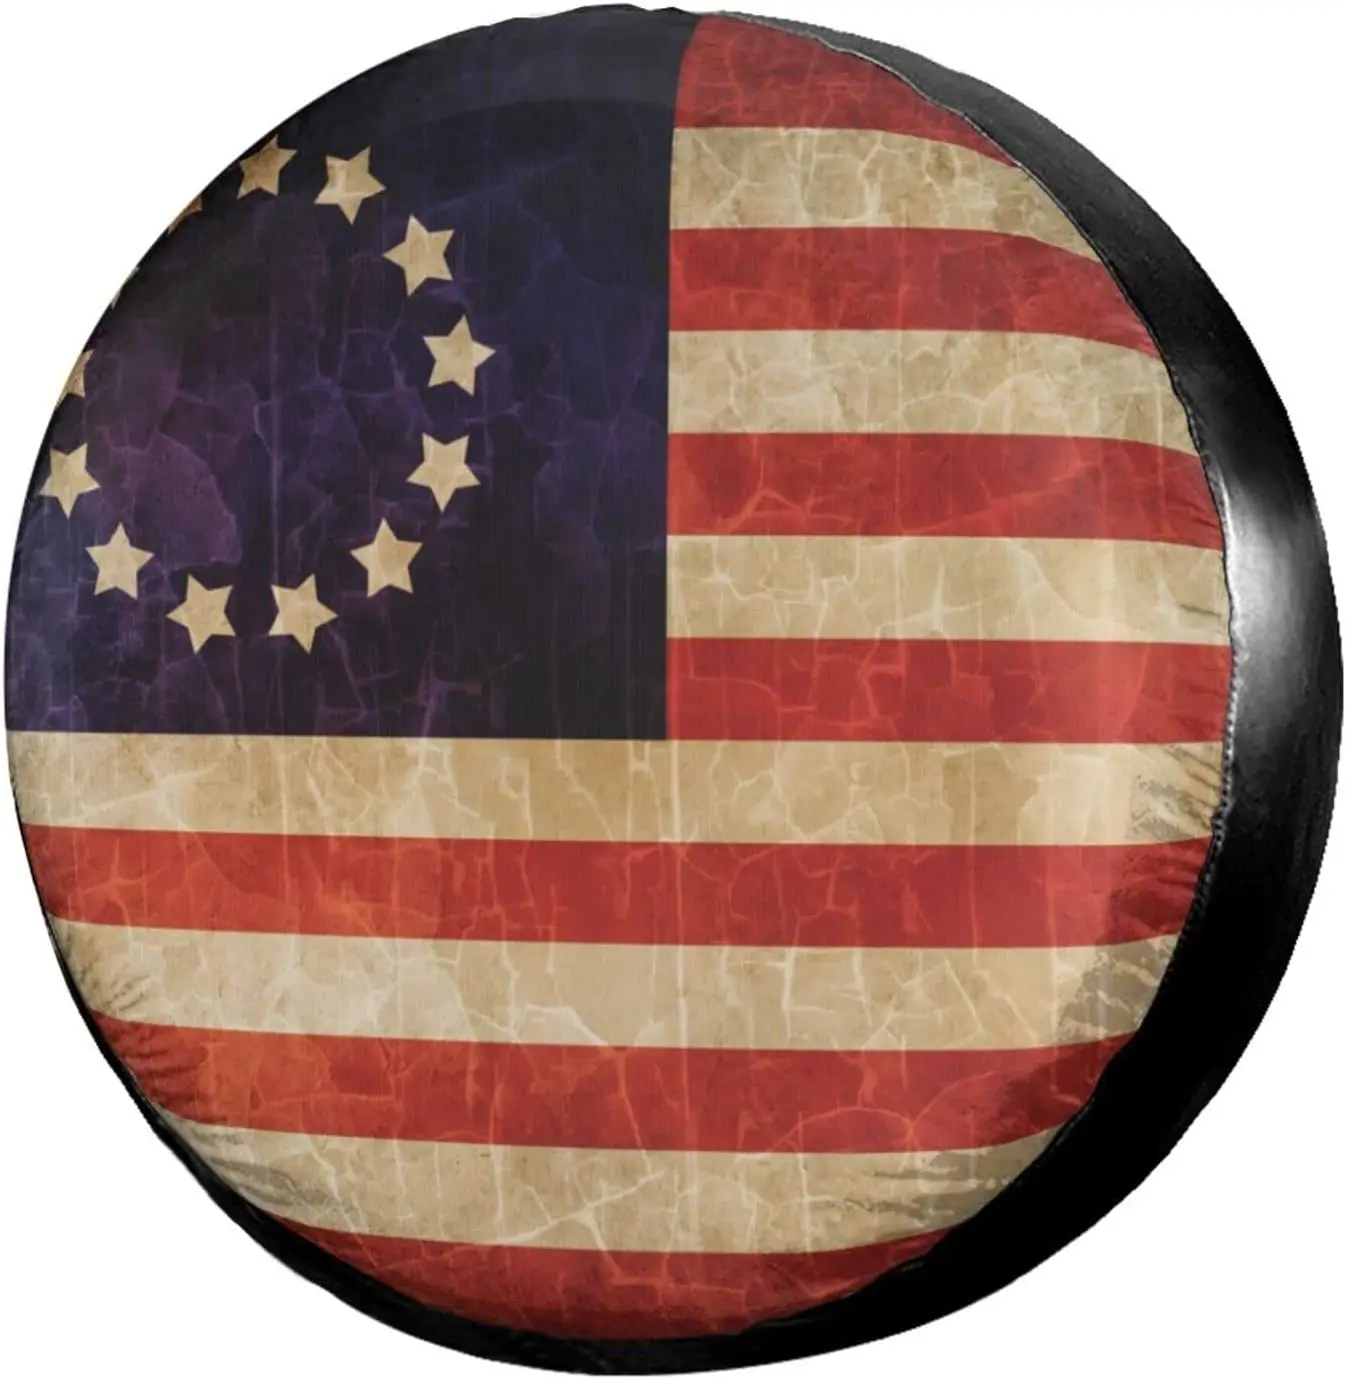 

USA Betsy Ross Flag Spare Tire Cover Waterproof Dust-Proof UV Sun Wheel Tire Cover Fit Fits most vehicle tire covers